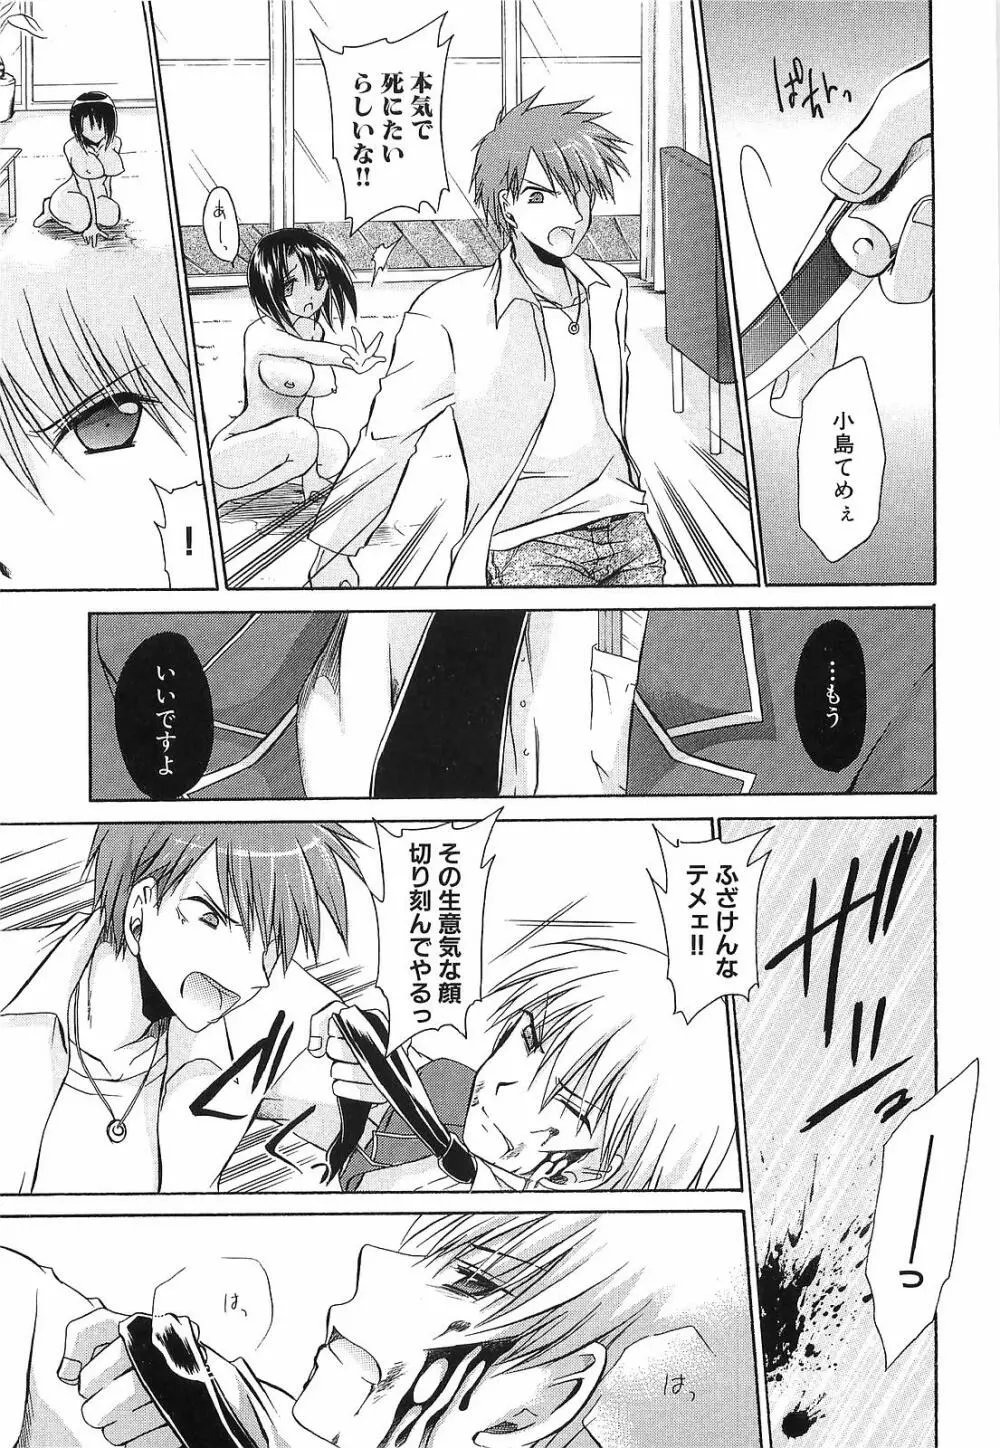 LOVE & HATE 3 FINAL～ENGAGE～通常版 Page.86